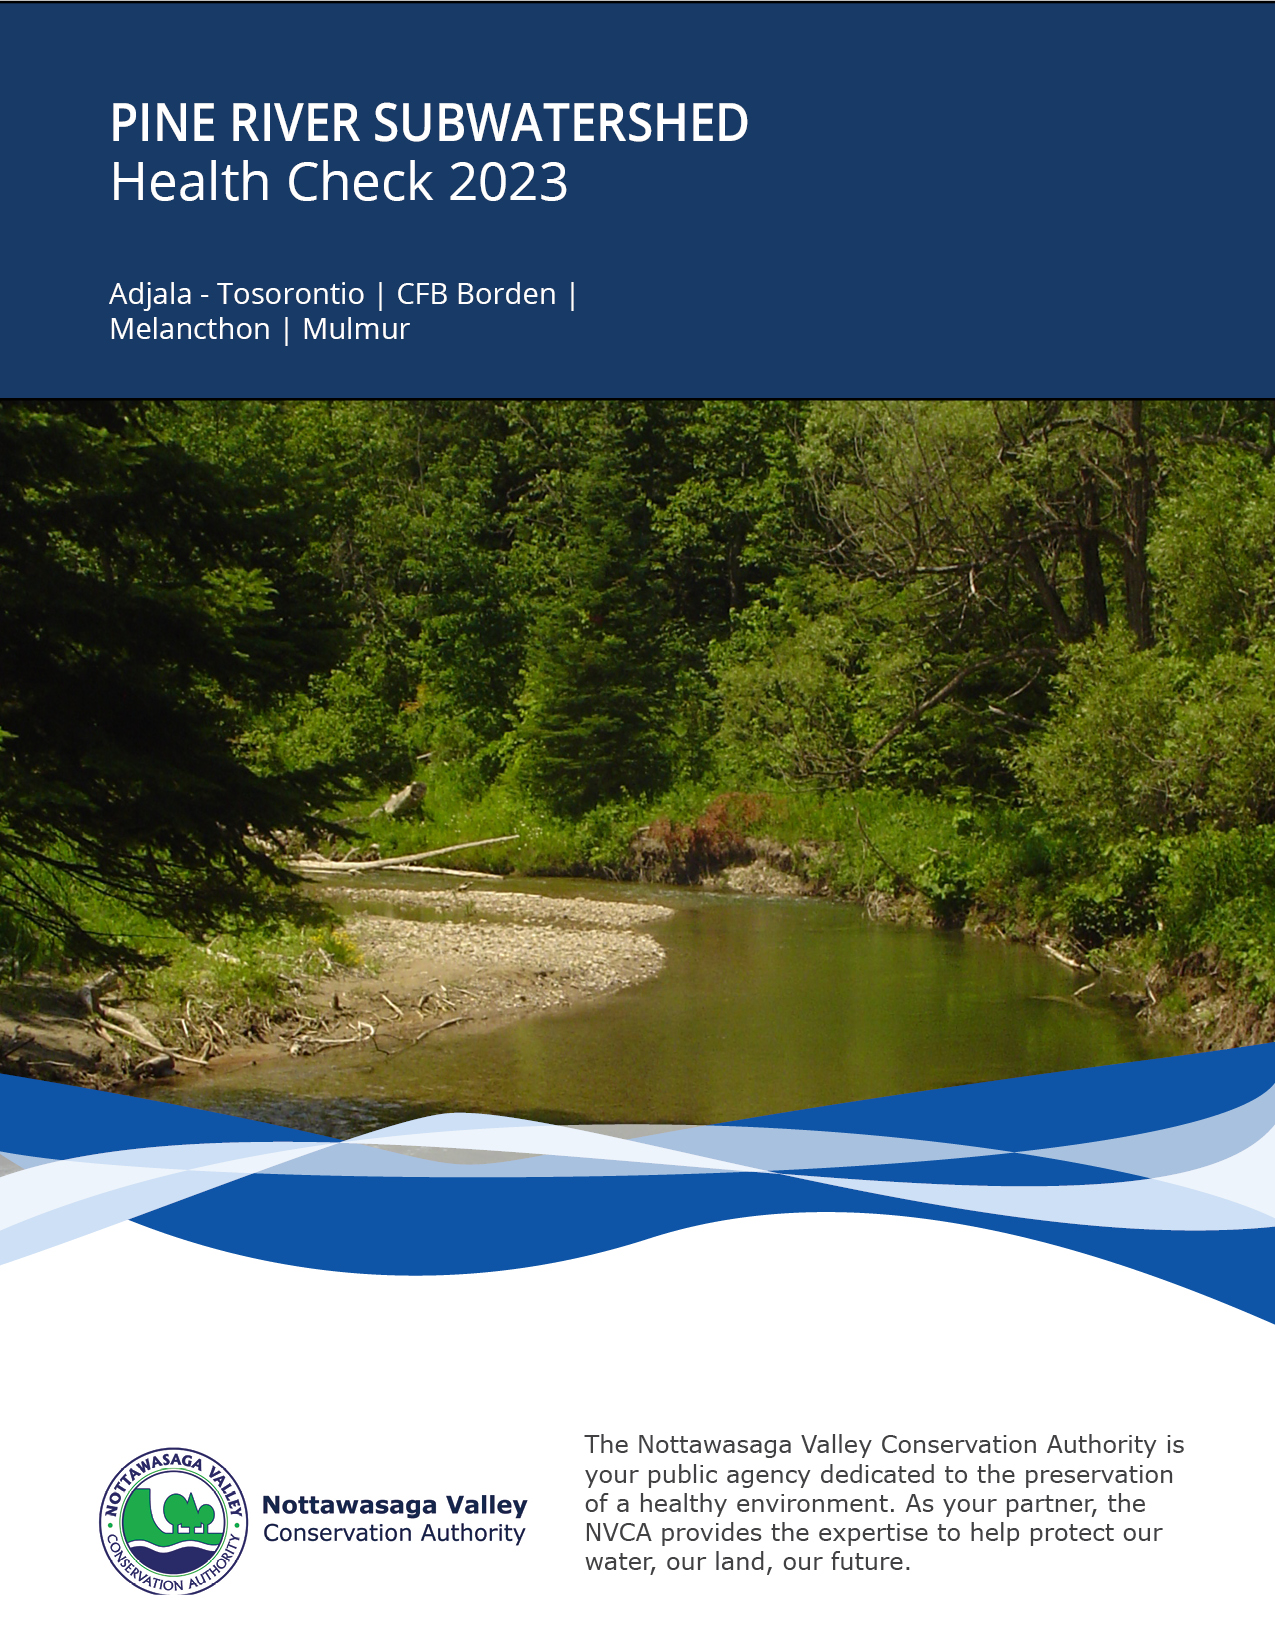 Pine River Subwatershed Health Check